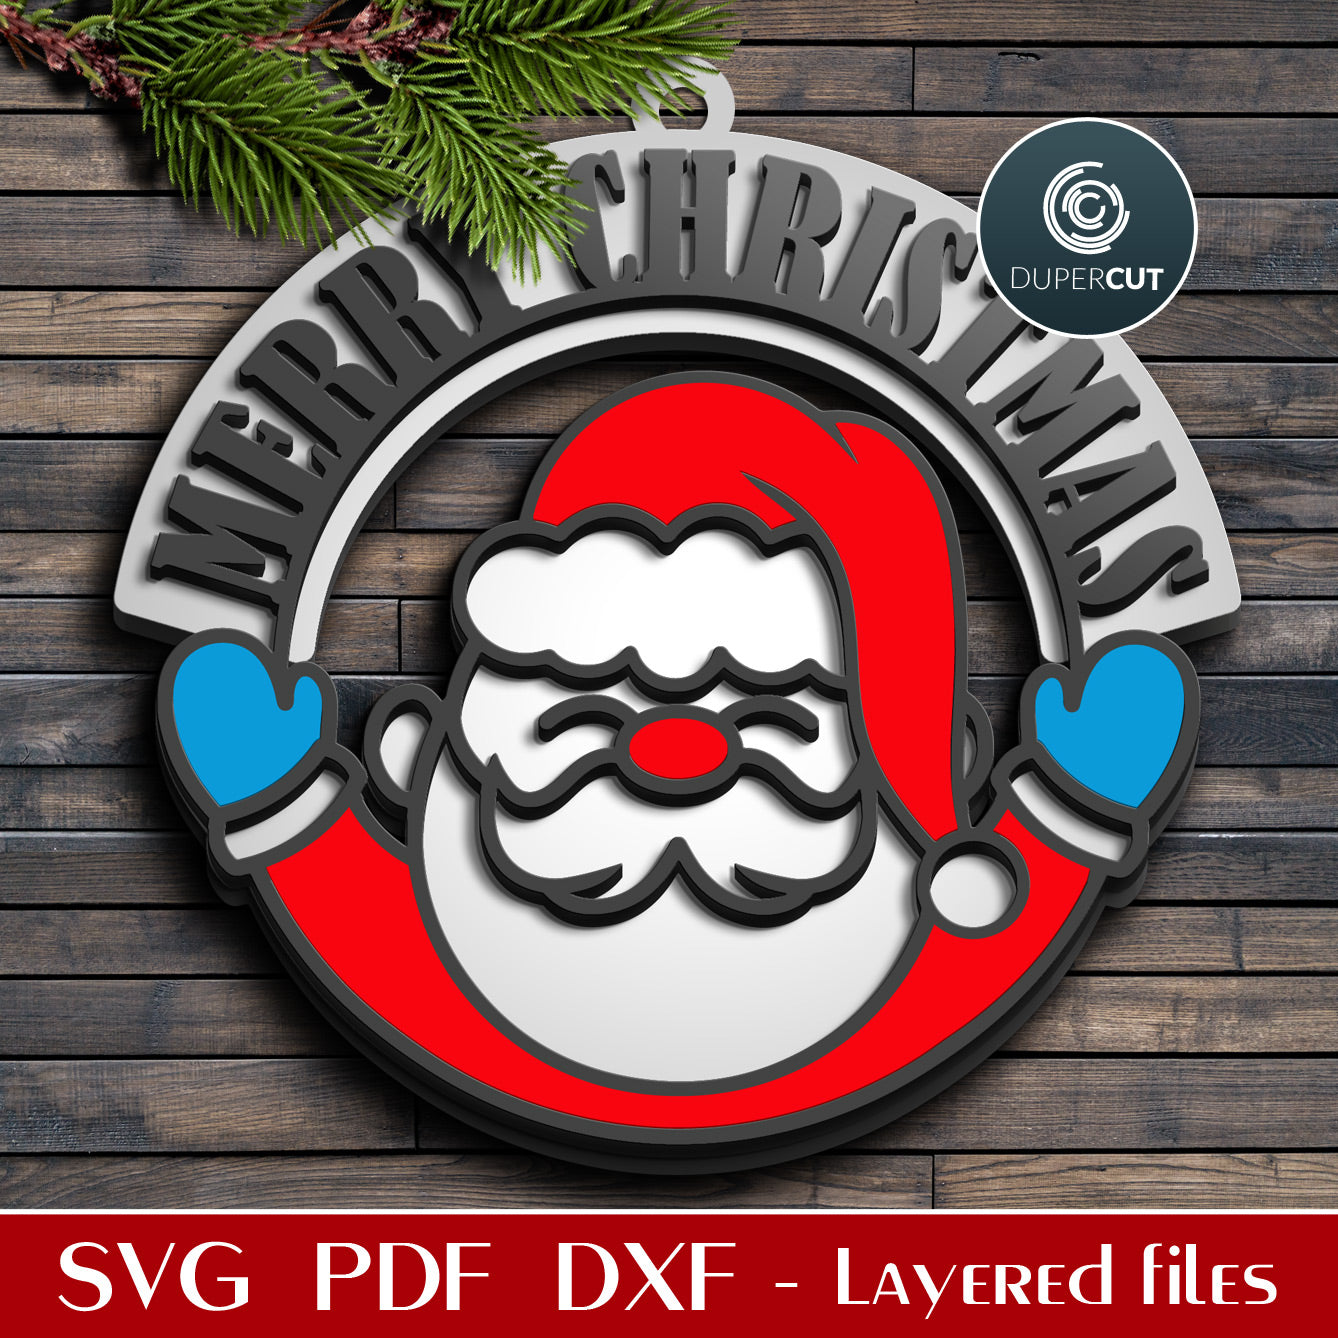 Merry Christmas Santa sign door hanger - SVG DXF layered vector cutting files for Glowforge, Cricut, Silhouette, CNC plasma by DuperCut